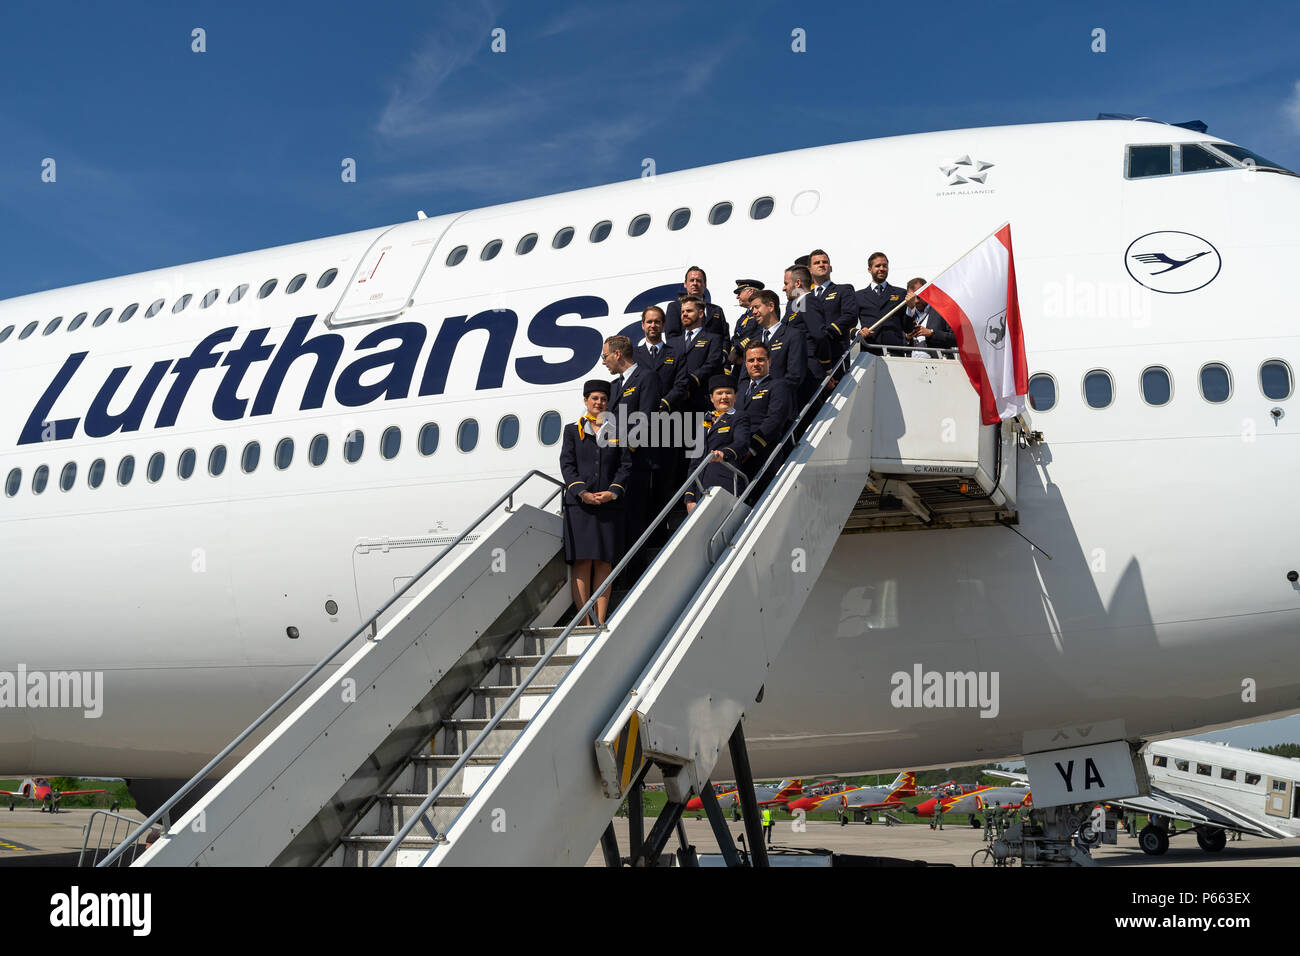 BERLIN - APRIL 28, 2018: The crew of widebody jet airliner Boeing 747-8. Lufthansa. Exhibition ILA Berlin Air Show 2018. Stock Photo